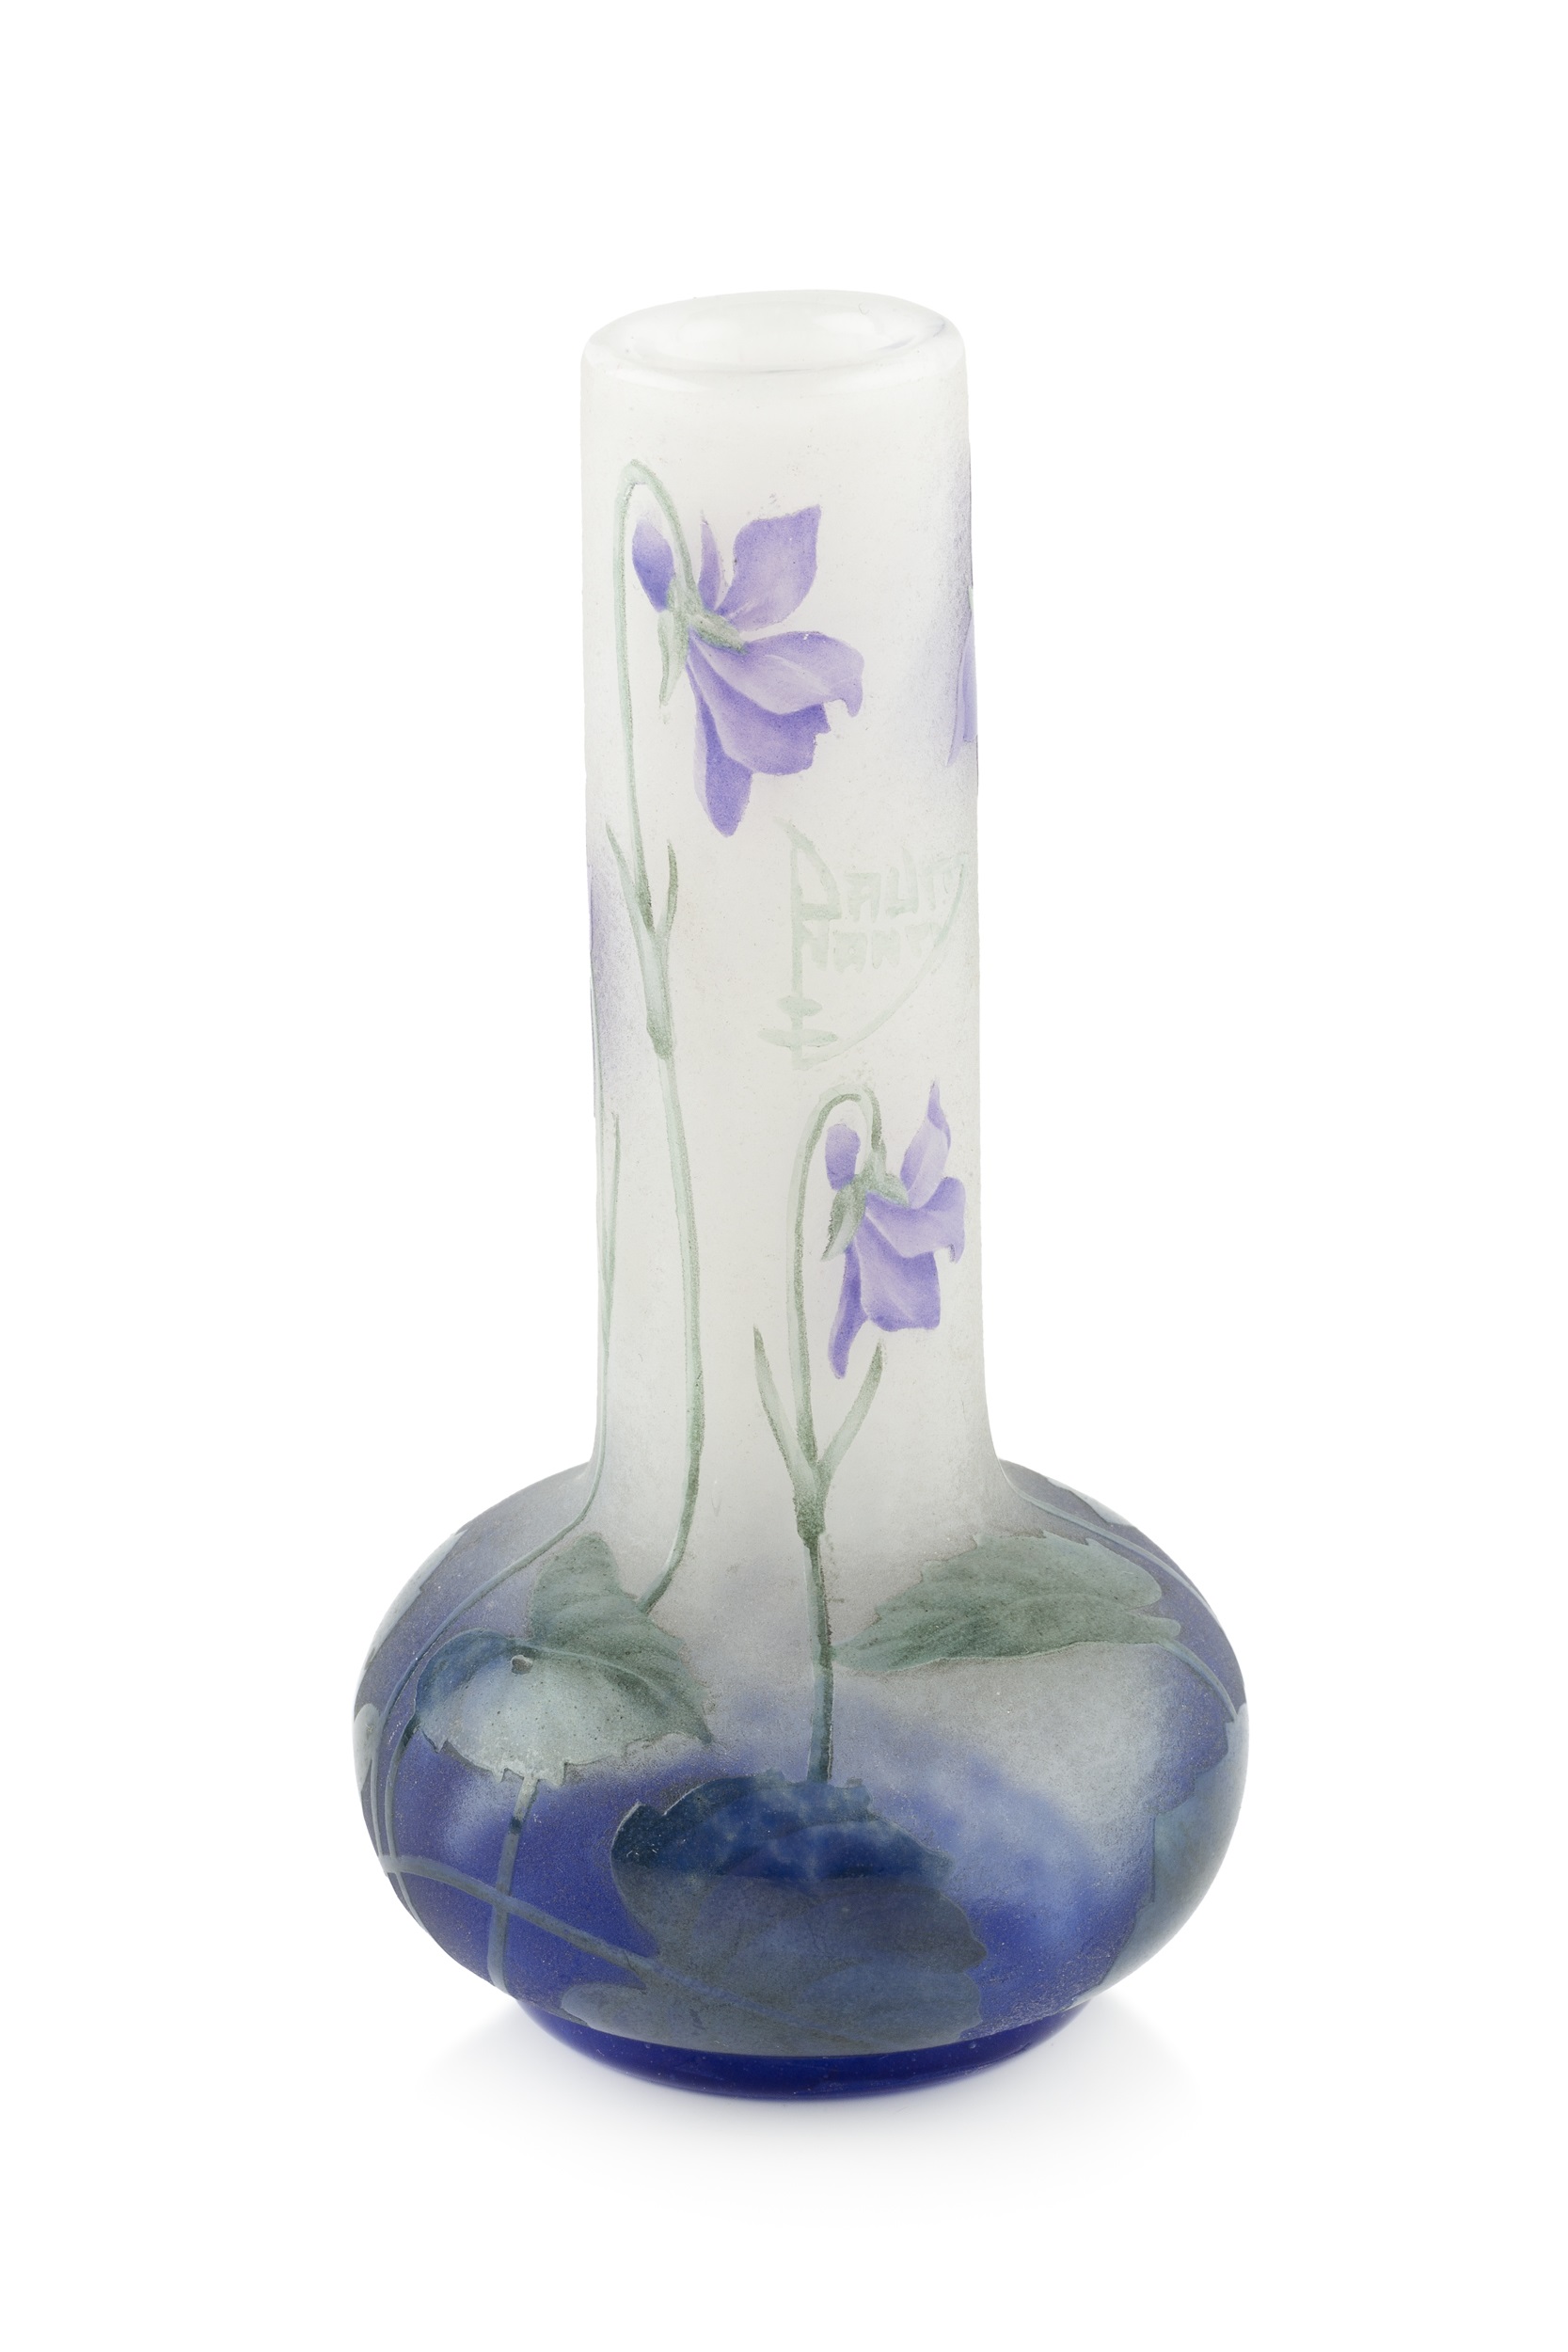 Daum Nancy Miniature vase, circa 1910 inlaid cameo glass, decorated with violet flowers signed